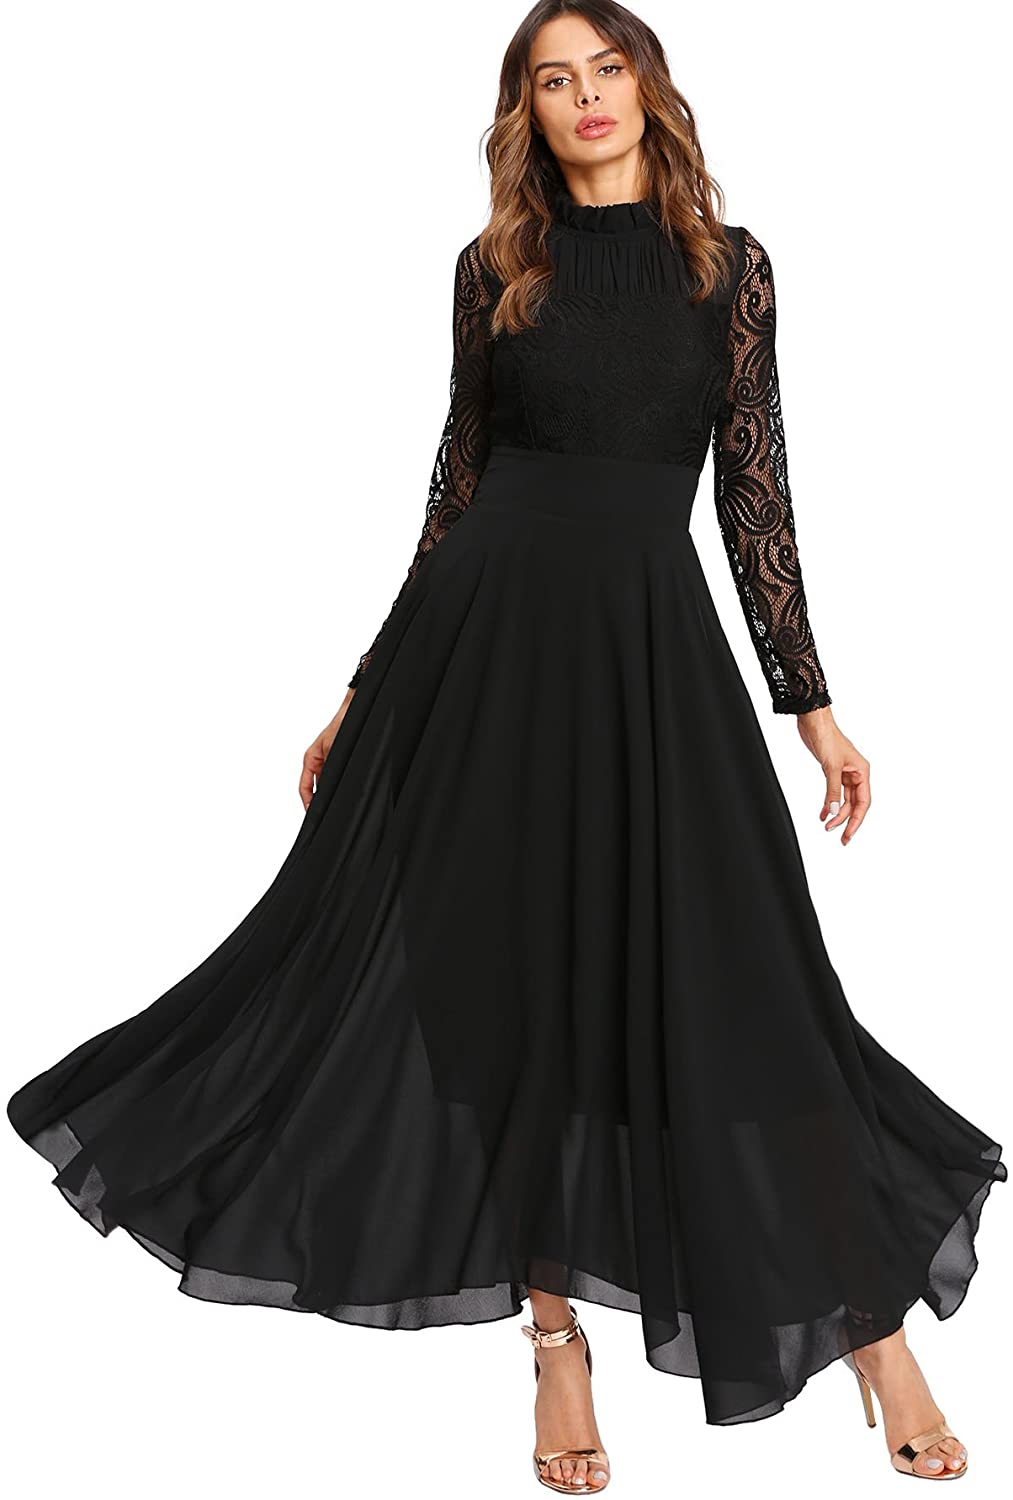 Milumia Women S Vintage Floral Lace Long Sleeve Ruched Neck Flowy Long Dress Ebay